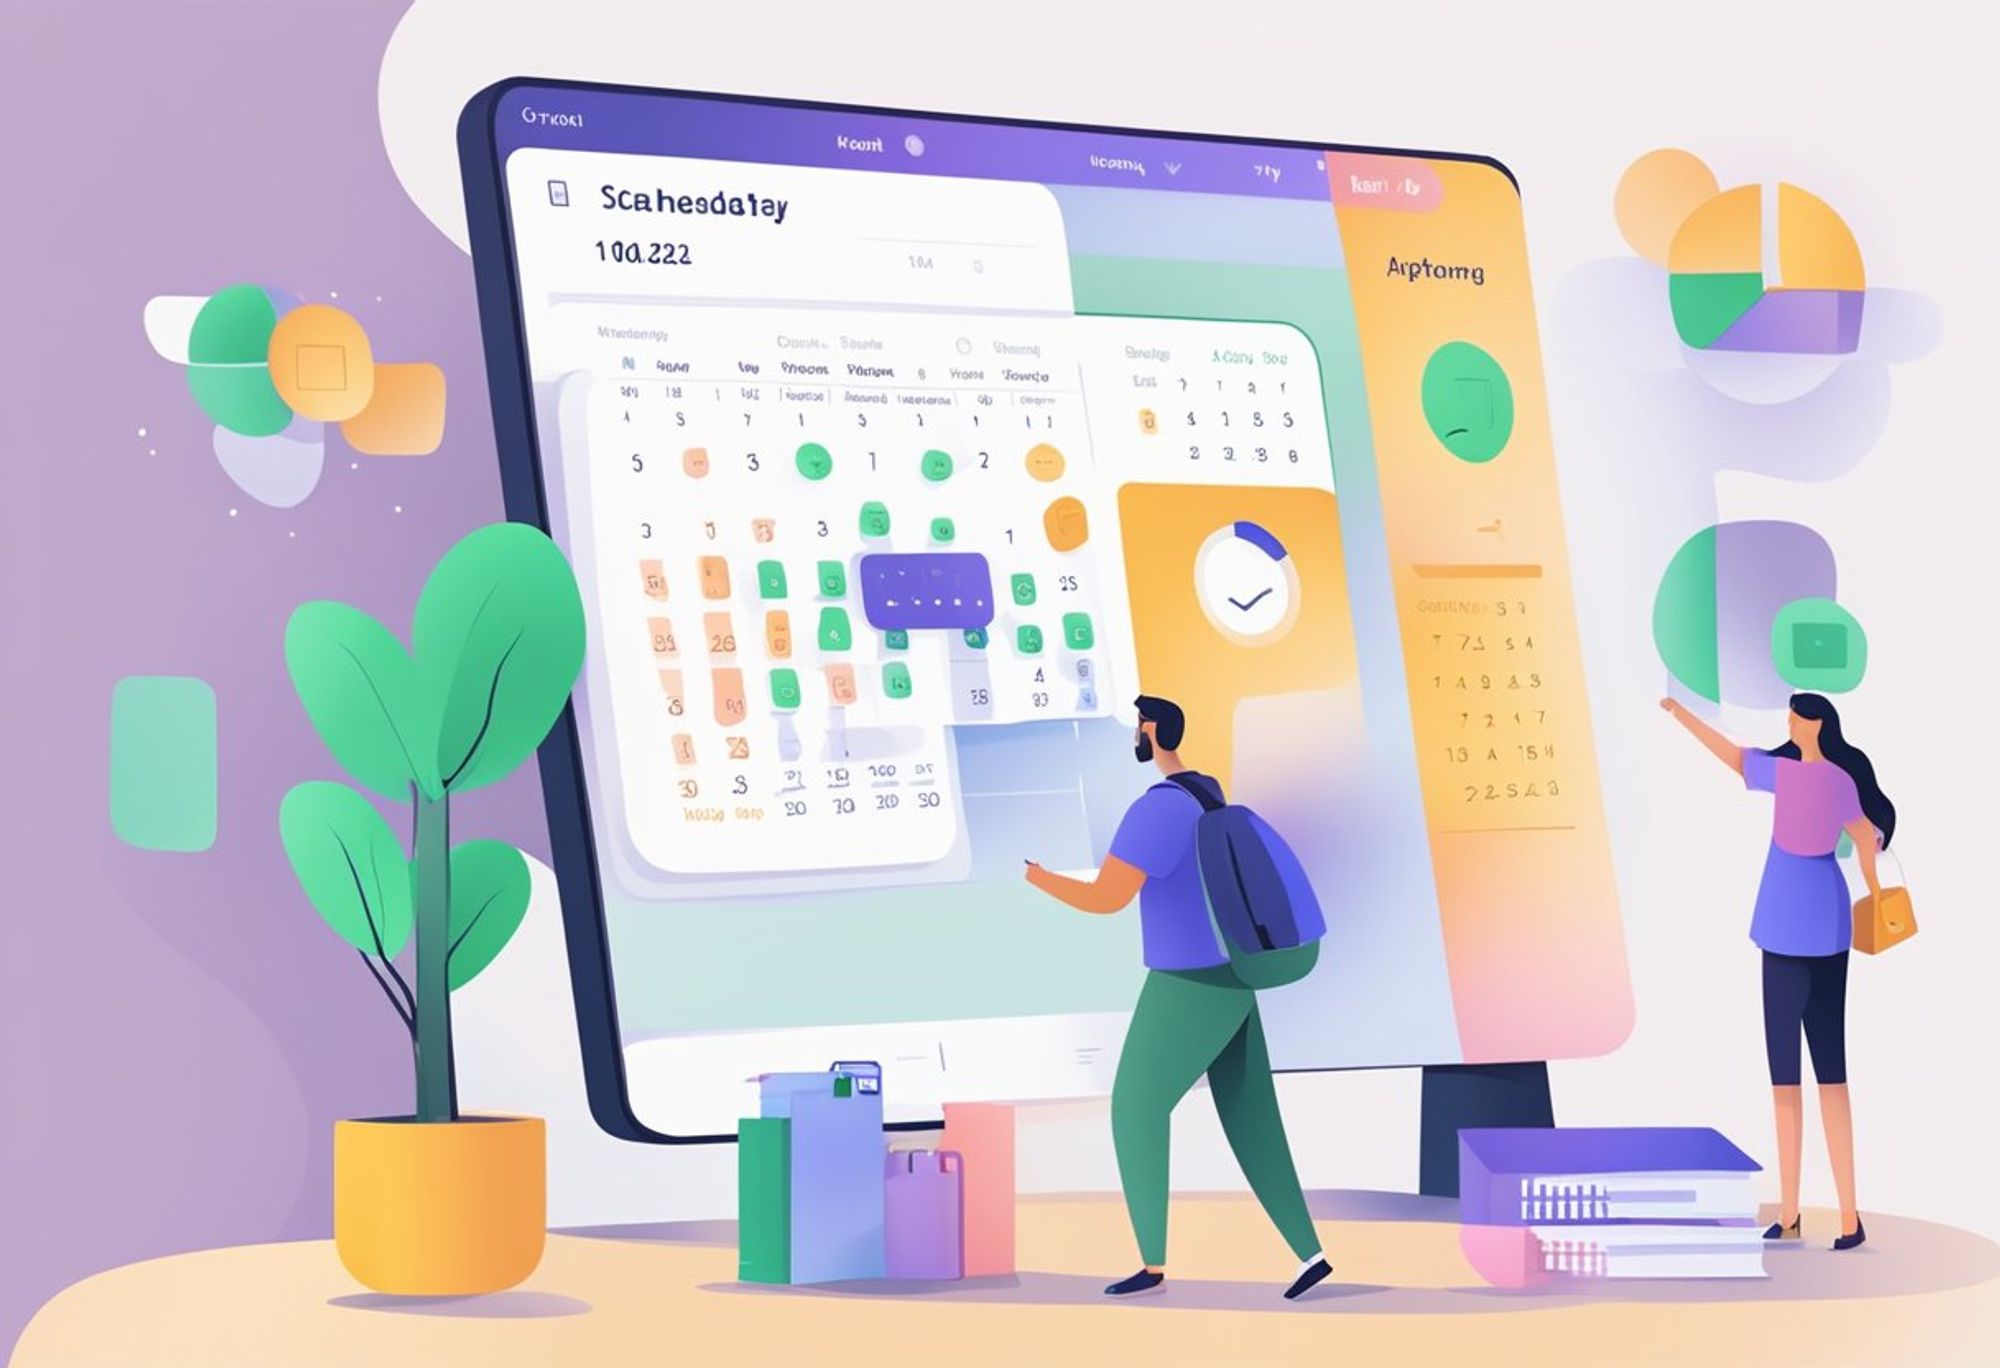 Animated image of two professionals interacting with a giant digital calendar display, showcasing the integration of AI in scheduling and appointment management, with emphasis on user engagement and technology in the workplace